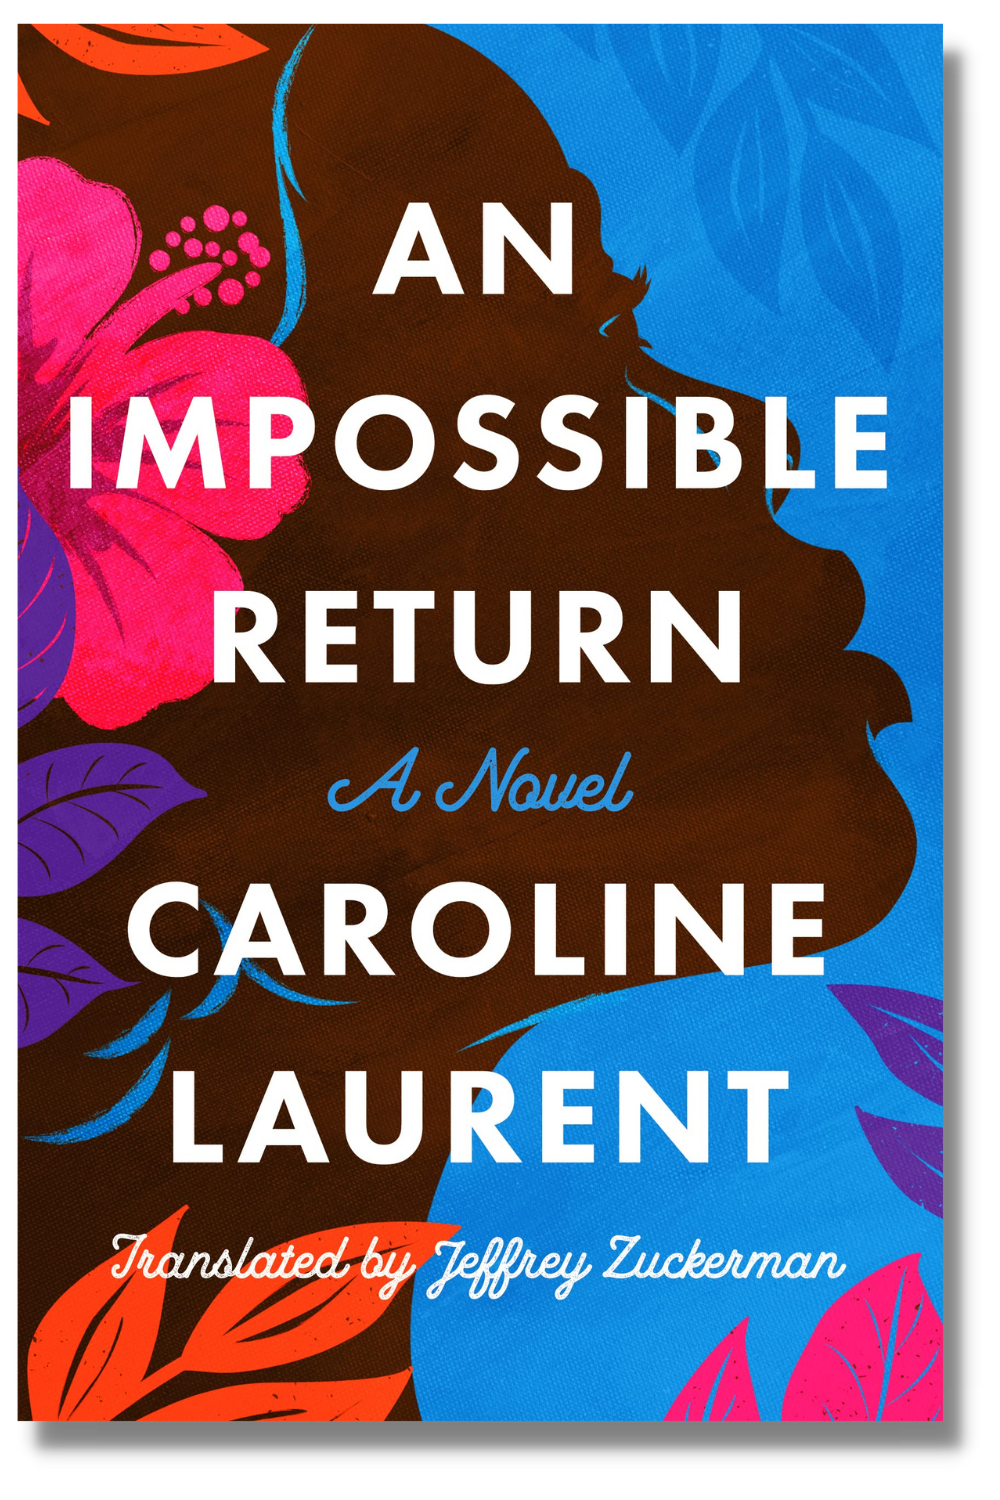 The cover of "The Impossible Return"